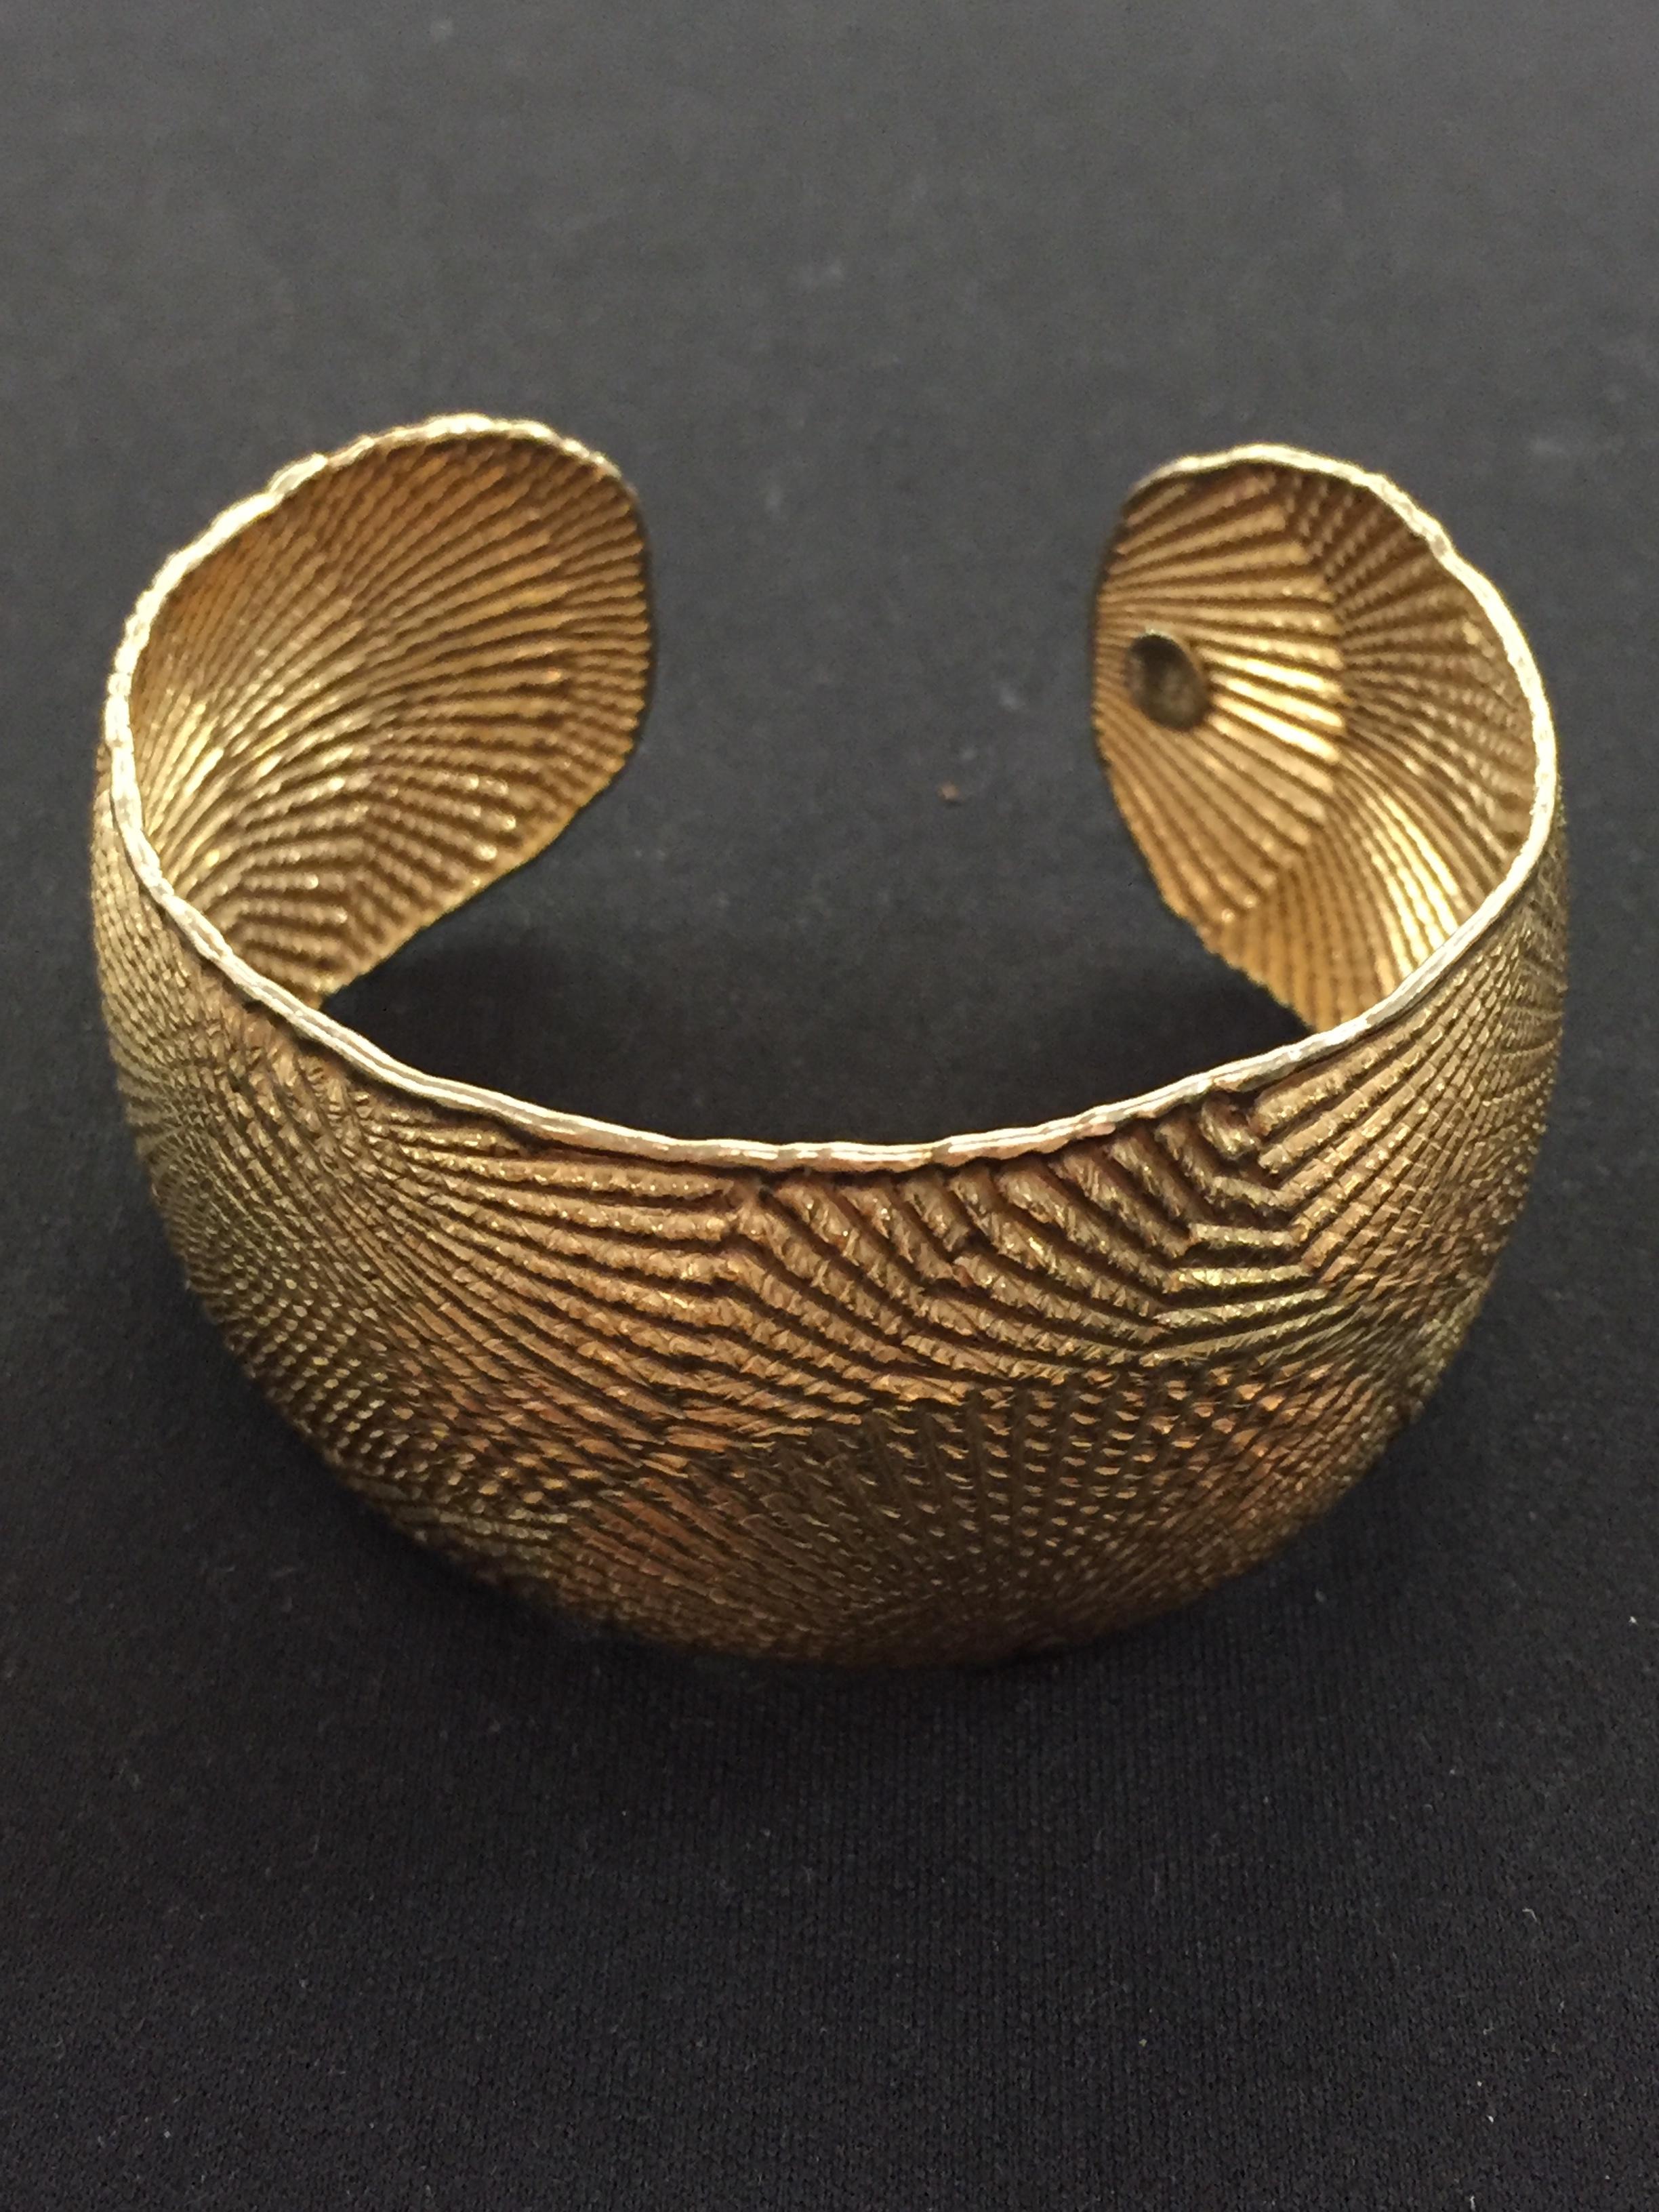 Italian Made Extra Large Gold-Tone Sterling Silver Cuff Bracelet